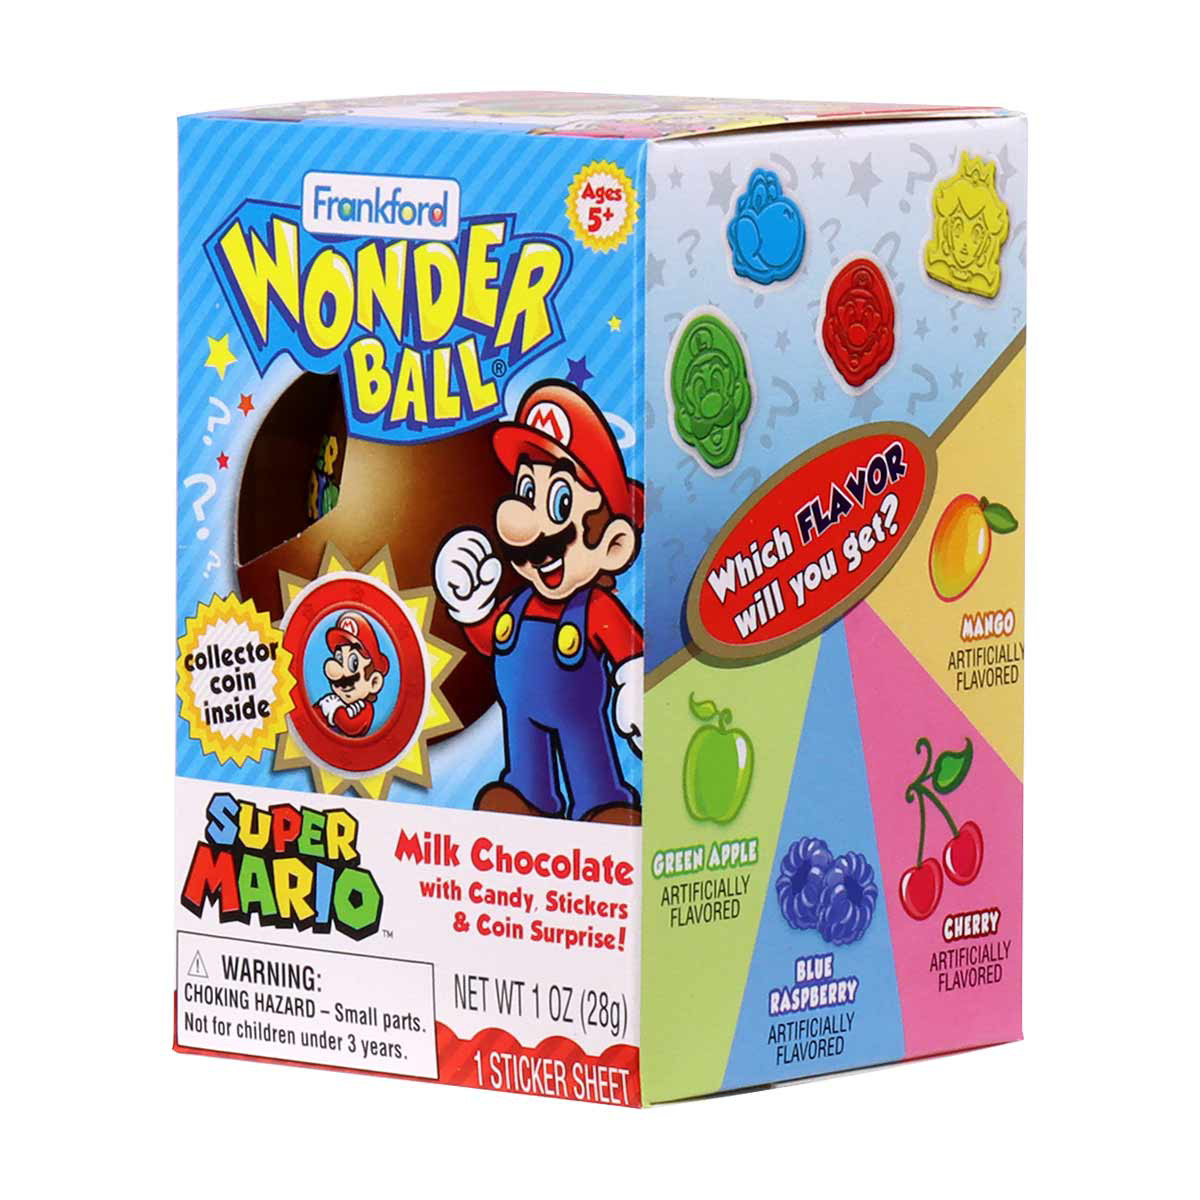 Frankford Super Mario Wonderball Milk Chocolate with Surprise Collectable Coin, 1 oz